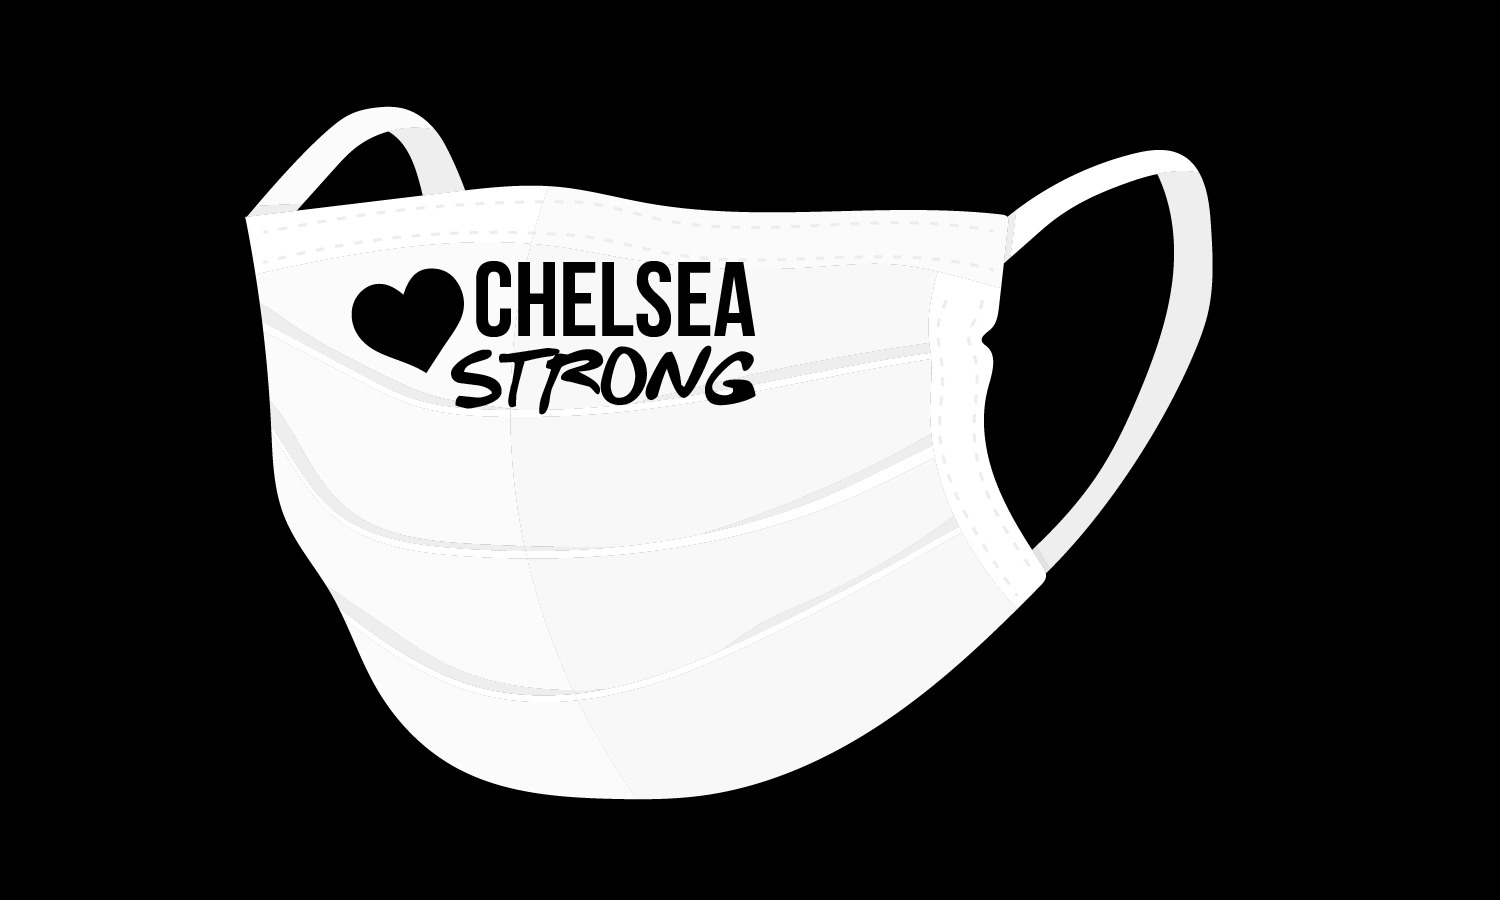 6821 CHELSEA STRONG WASHABLE & REUSABLE FACE COVERING MASK.